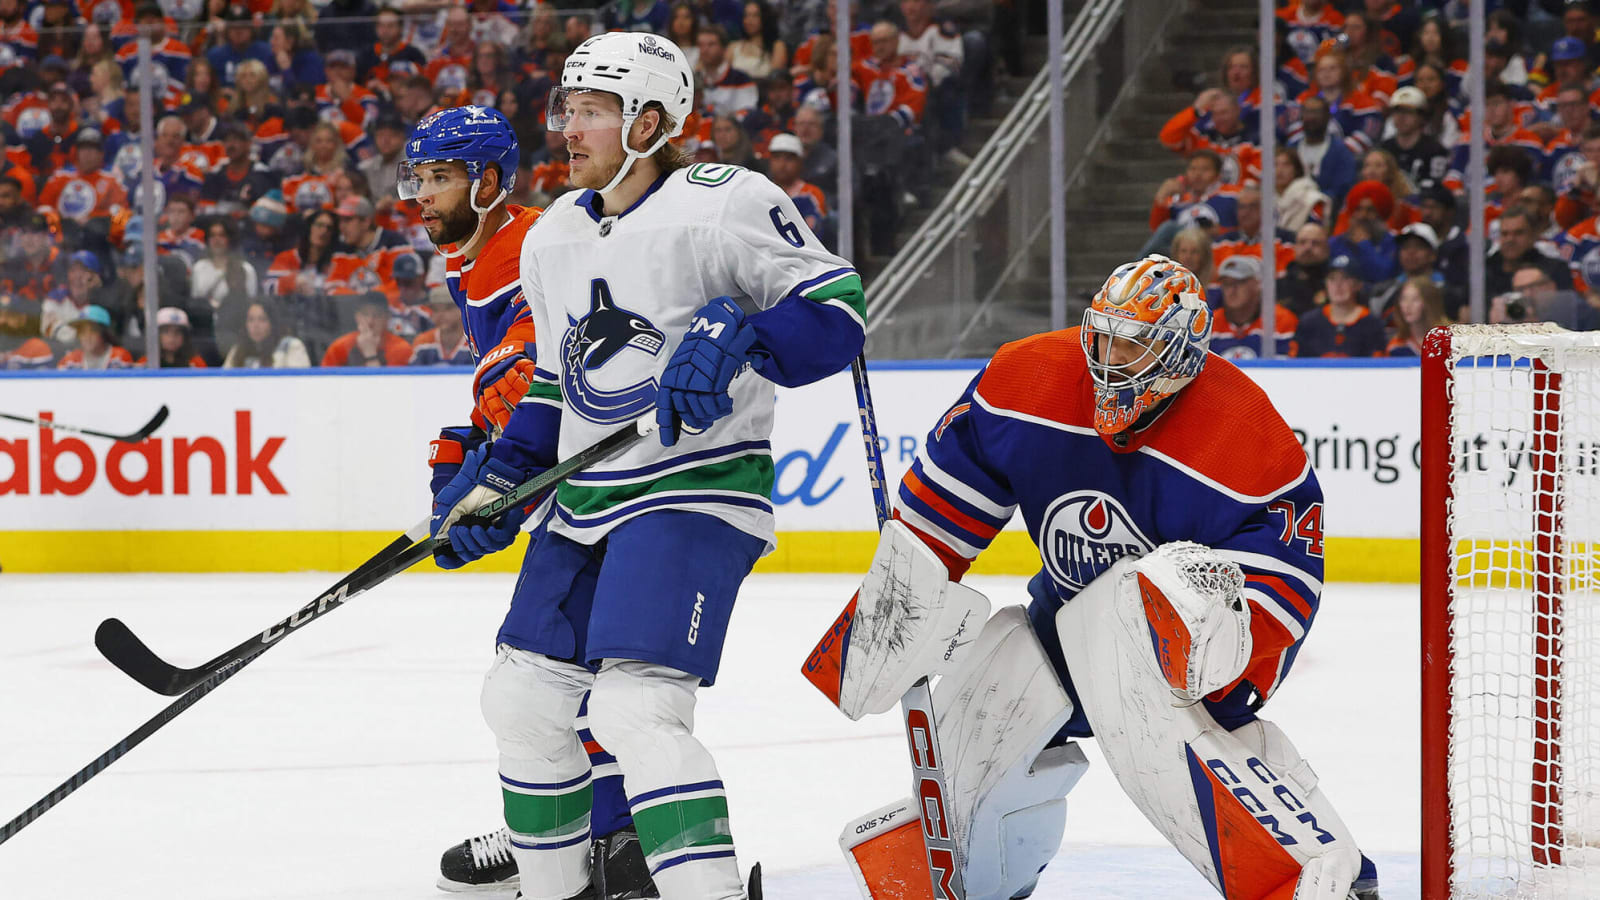 Report: Canucks’ Brock Boeser to miss Game 7 against Oilers with blood clotting issue